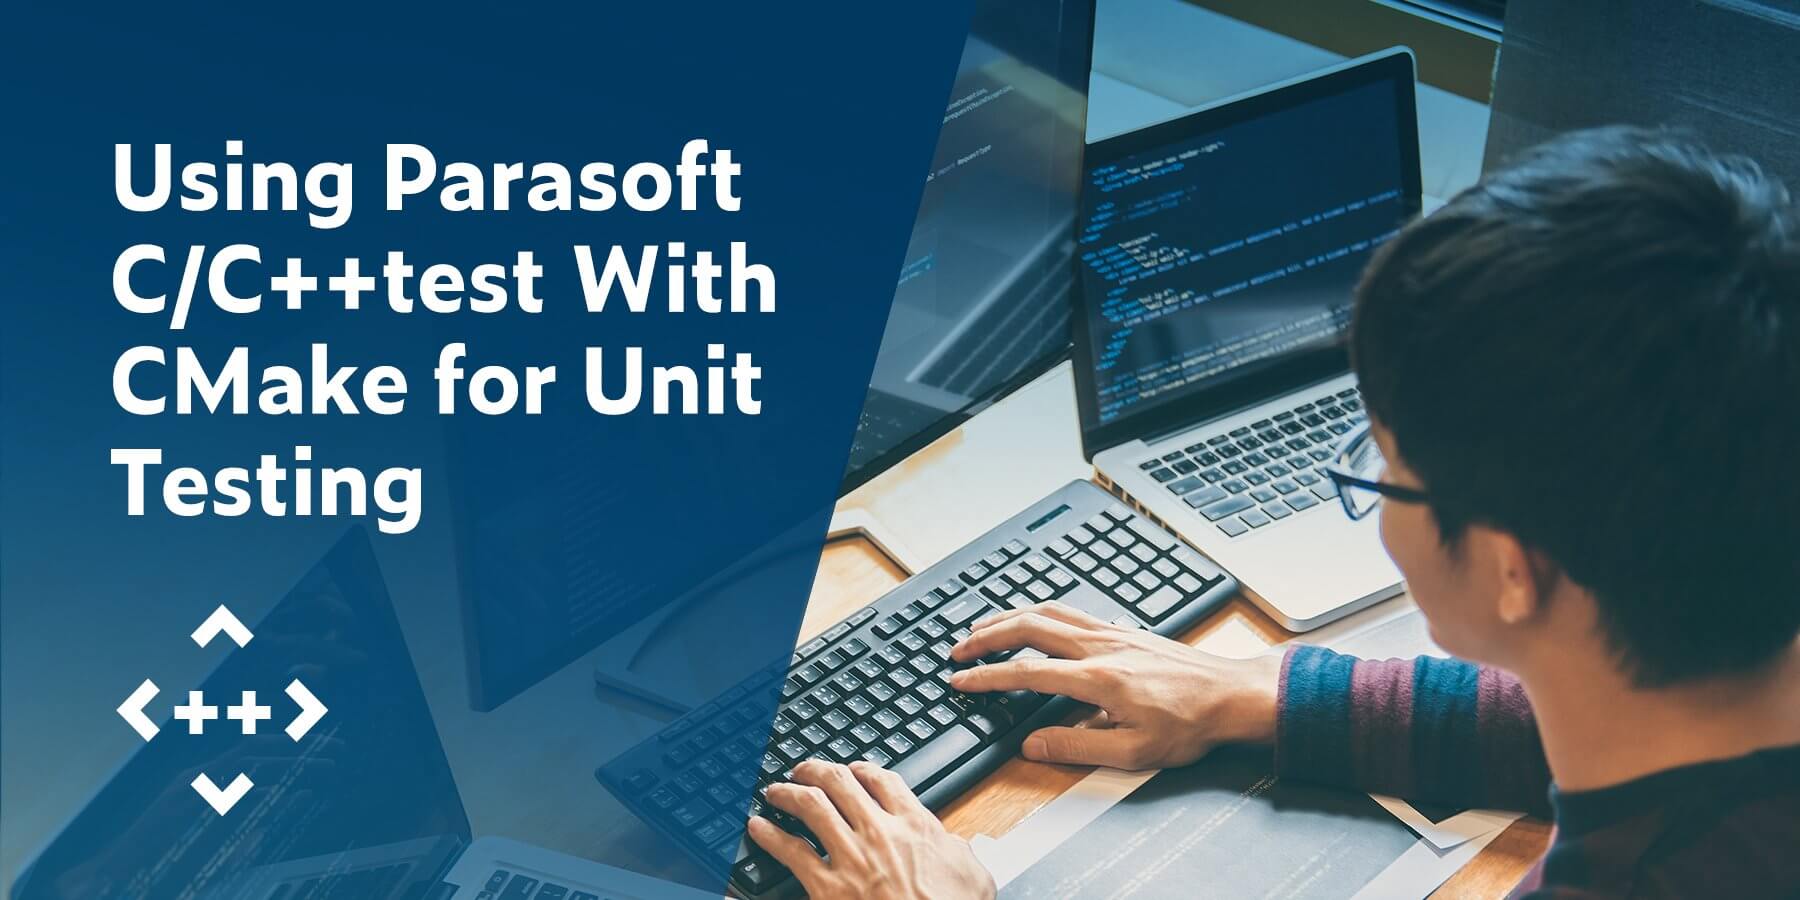 Using Parasoft C/C++test With CMake for Unit Testing